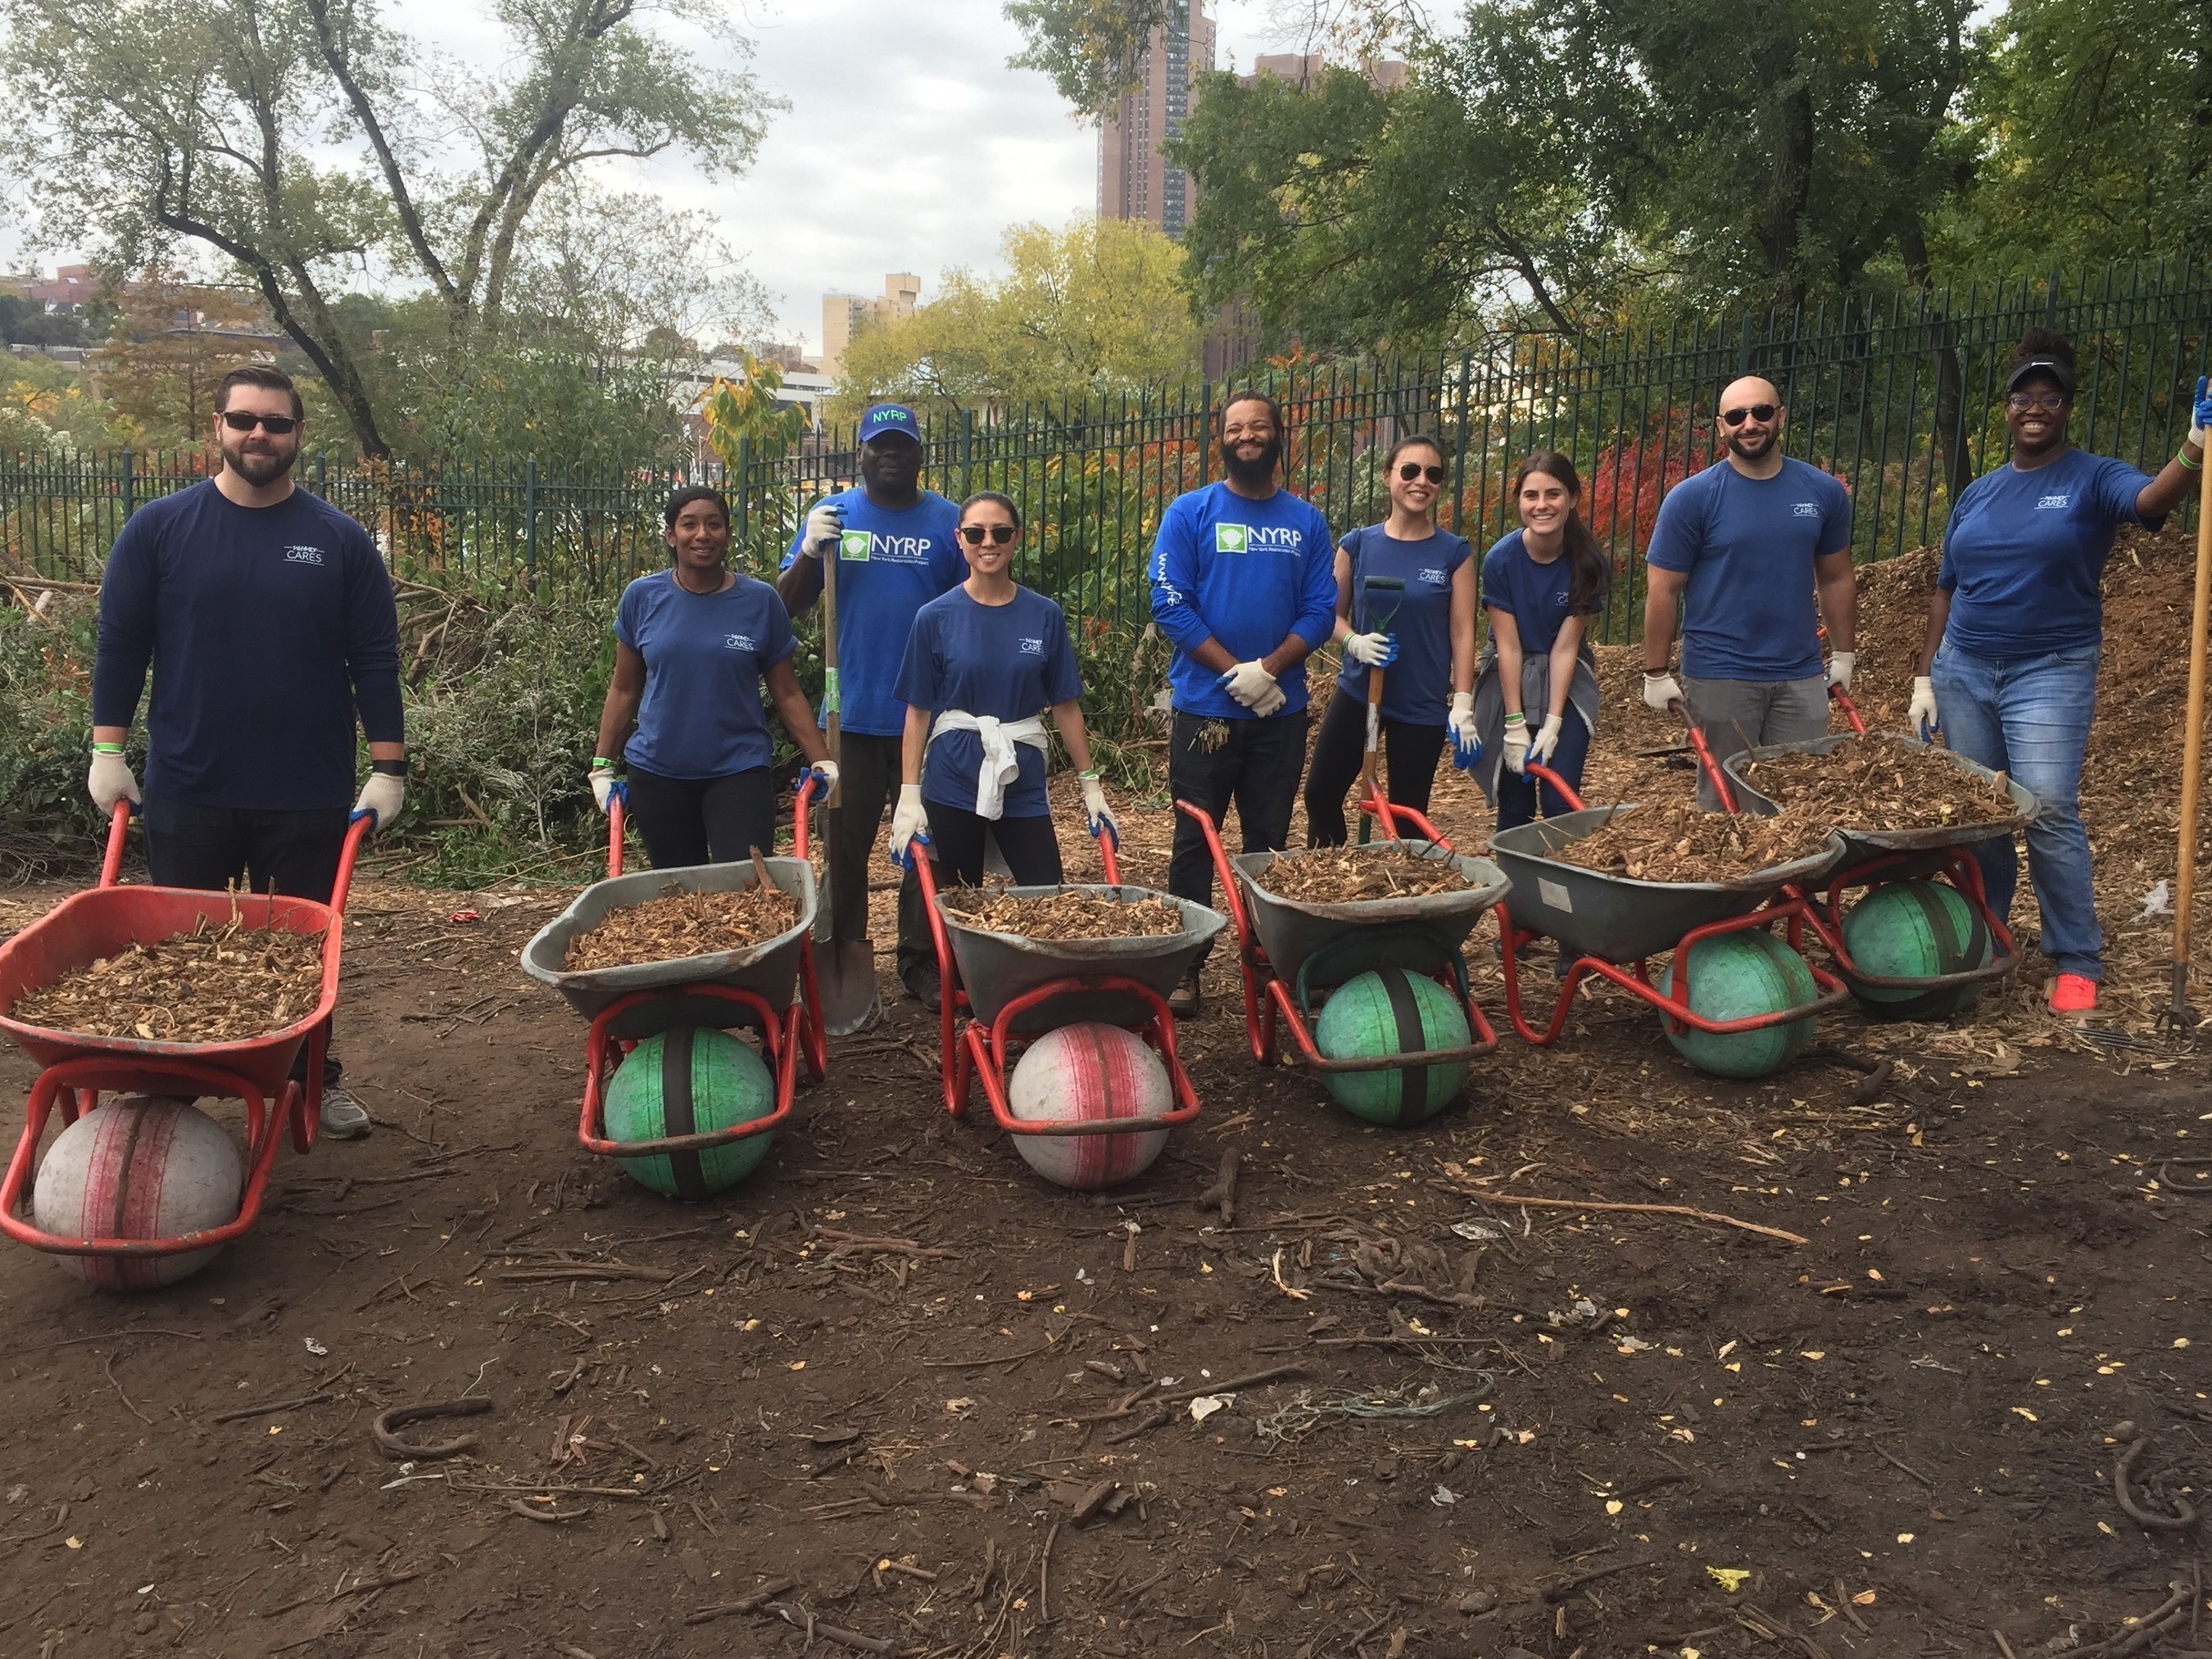 WebMD Cares Impact Day 2016 - NYC WebMD employees and NYRP staff work to mulch Sherman Creek park in Manhattan.